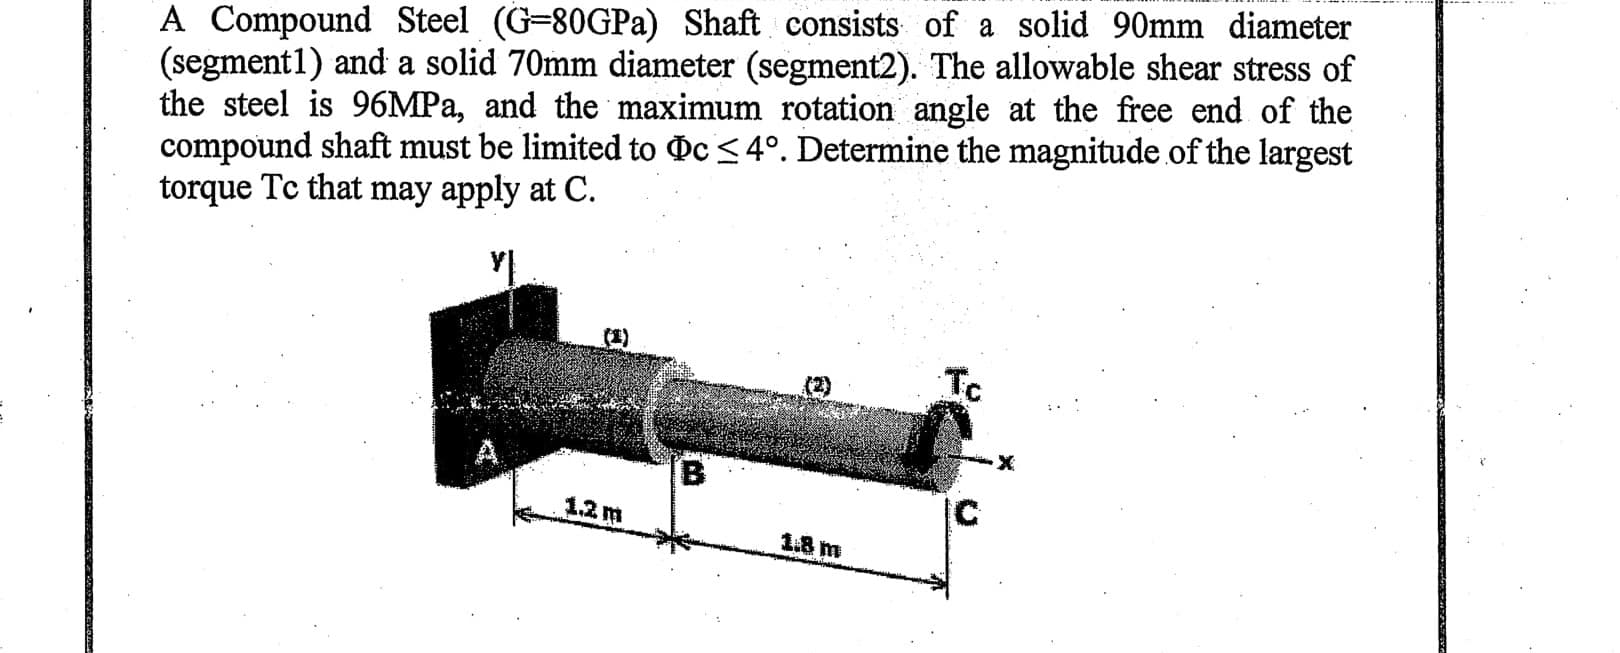 A Compound Steel (G=80GPA) Shaft consists of a solid 90mm diameter
(segment1) and a solid 70mm diameter (segment2). The allowable shear stress of
the steel is 96MPA, and the maximum rotation angle at the free end of the
compound shaft must be limited to c <4°. Determine the magnitude of the largest
torque Tc that may apply at C.
(1)
Tc
(2)
B.
IC
1.2 m
1.8 m
